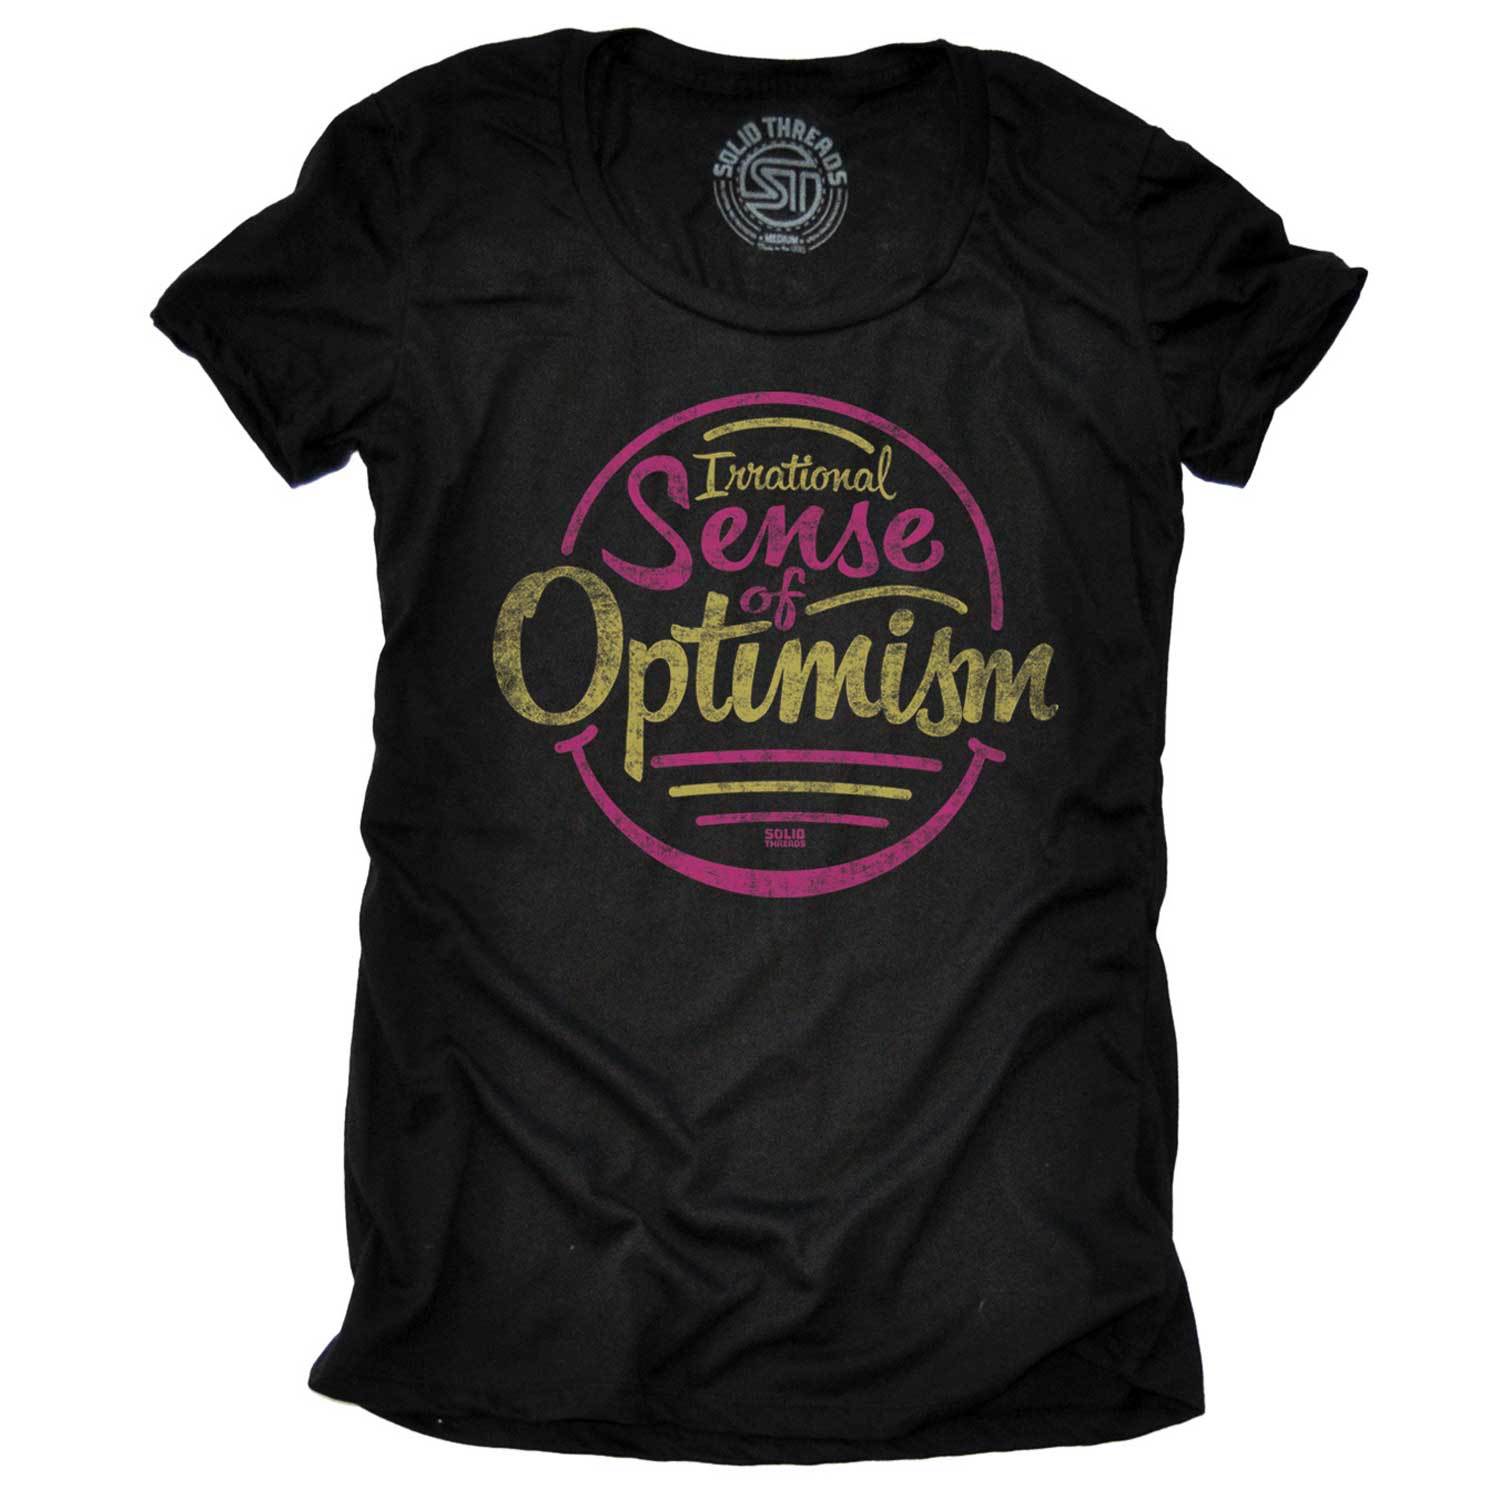 Women's Irrational Sense Of Optimism Cool Graphic T-Shirt | Vintage Positivity Tee | Solid Threads